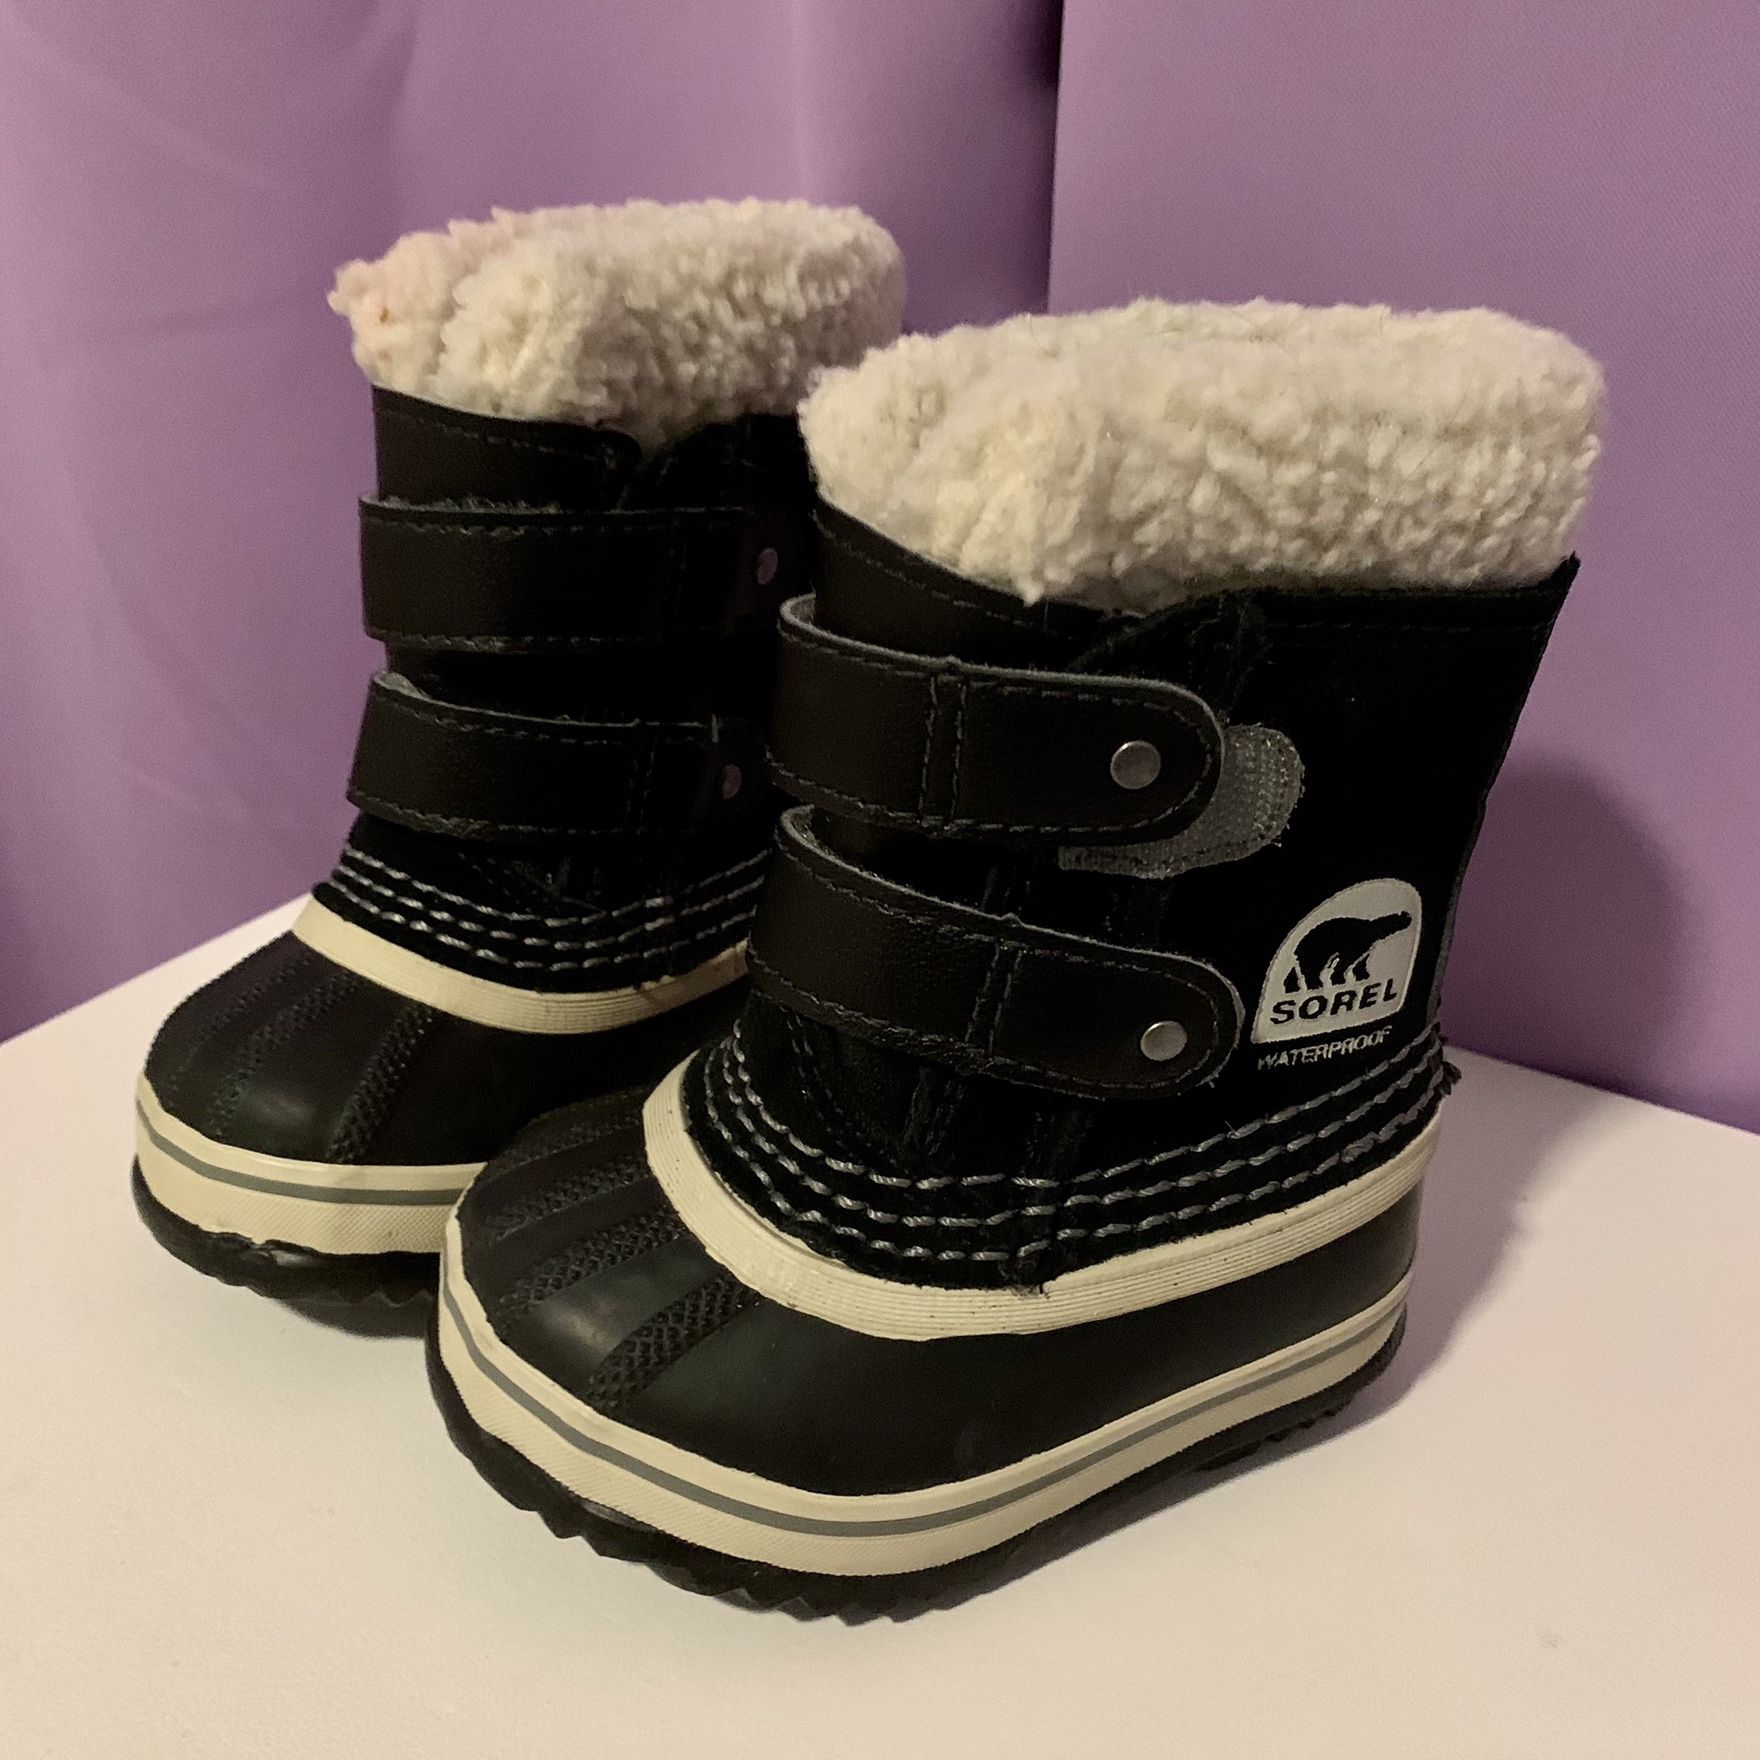 Kids Sorel Snow Boots, Size 4, Used Once.